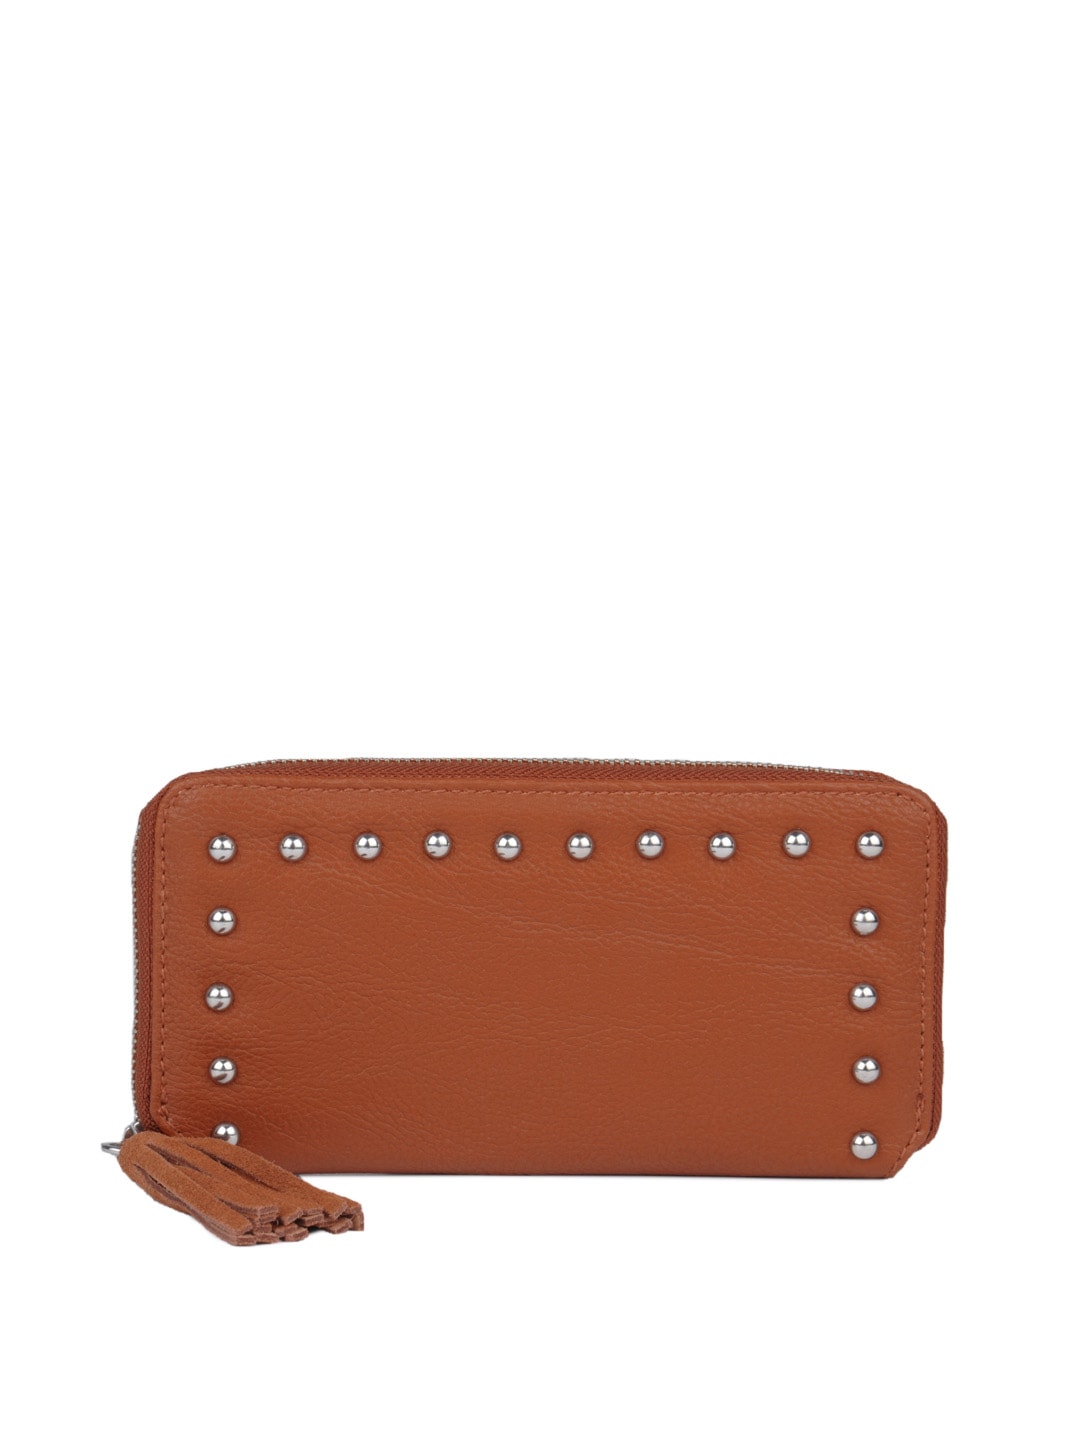 French Connection Women Tan Wallet